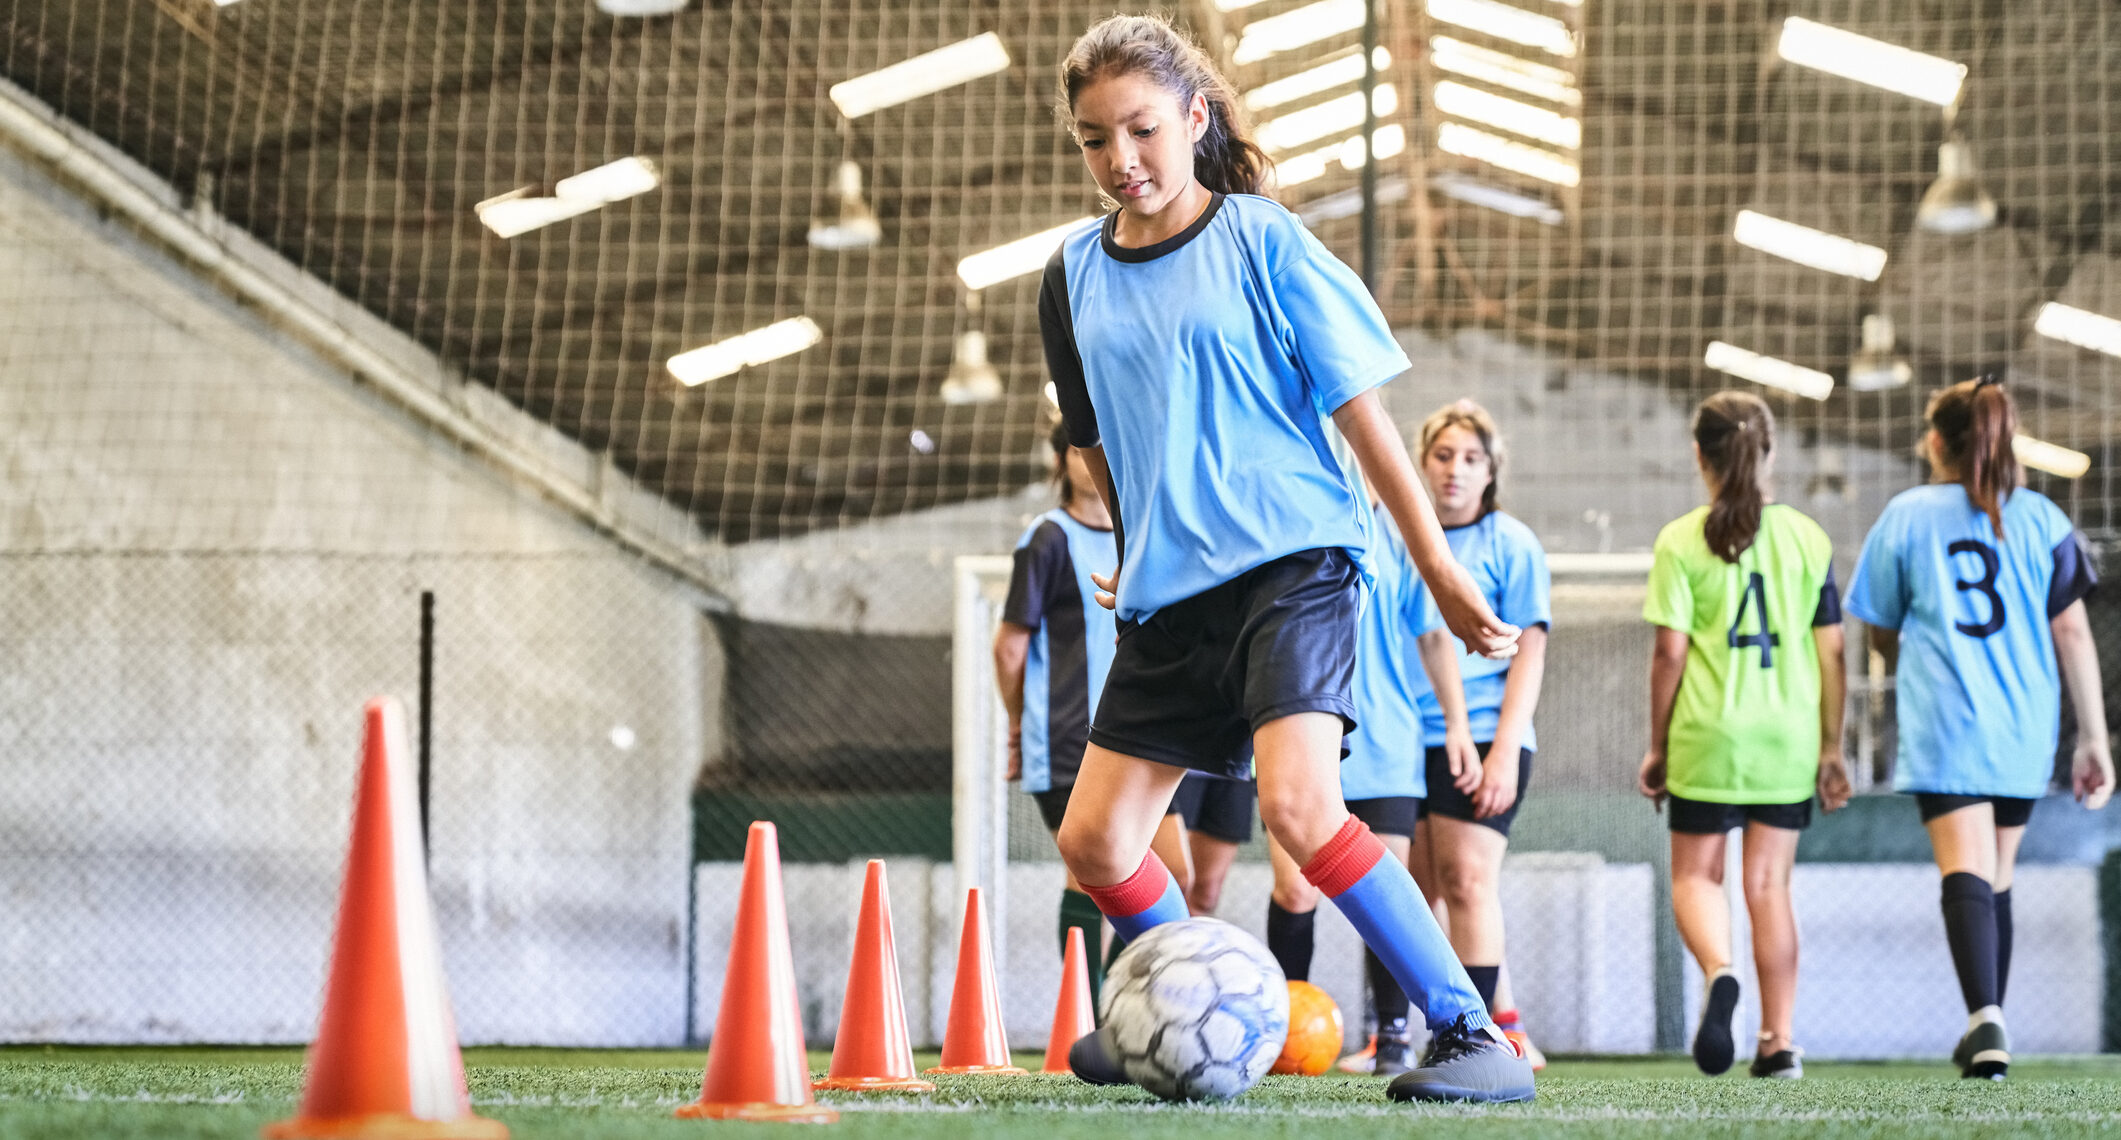 Confident Female Soccer Player Practicing Skills At Court